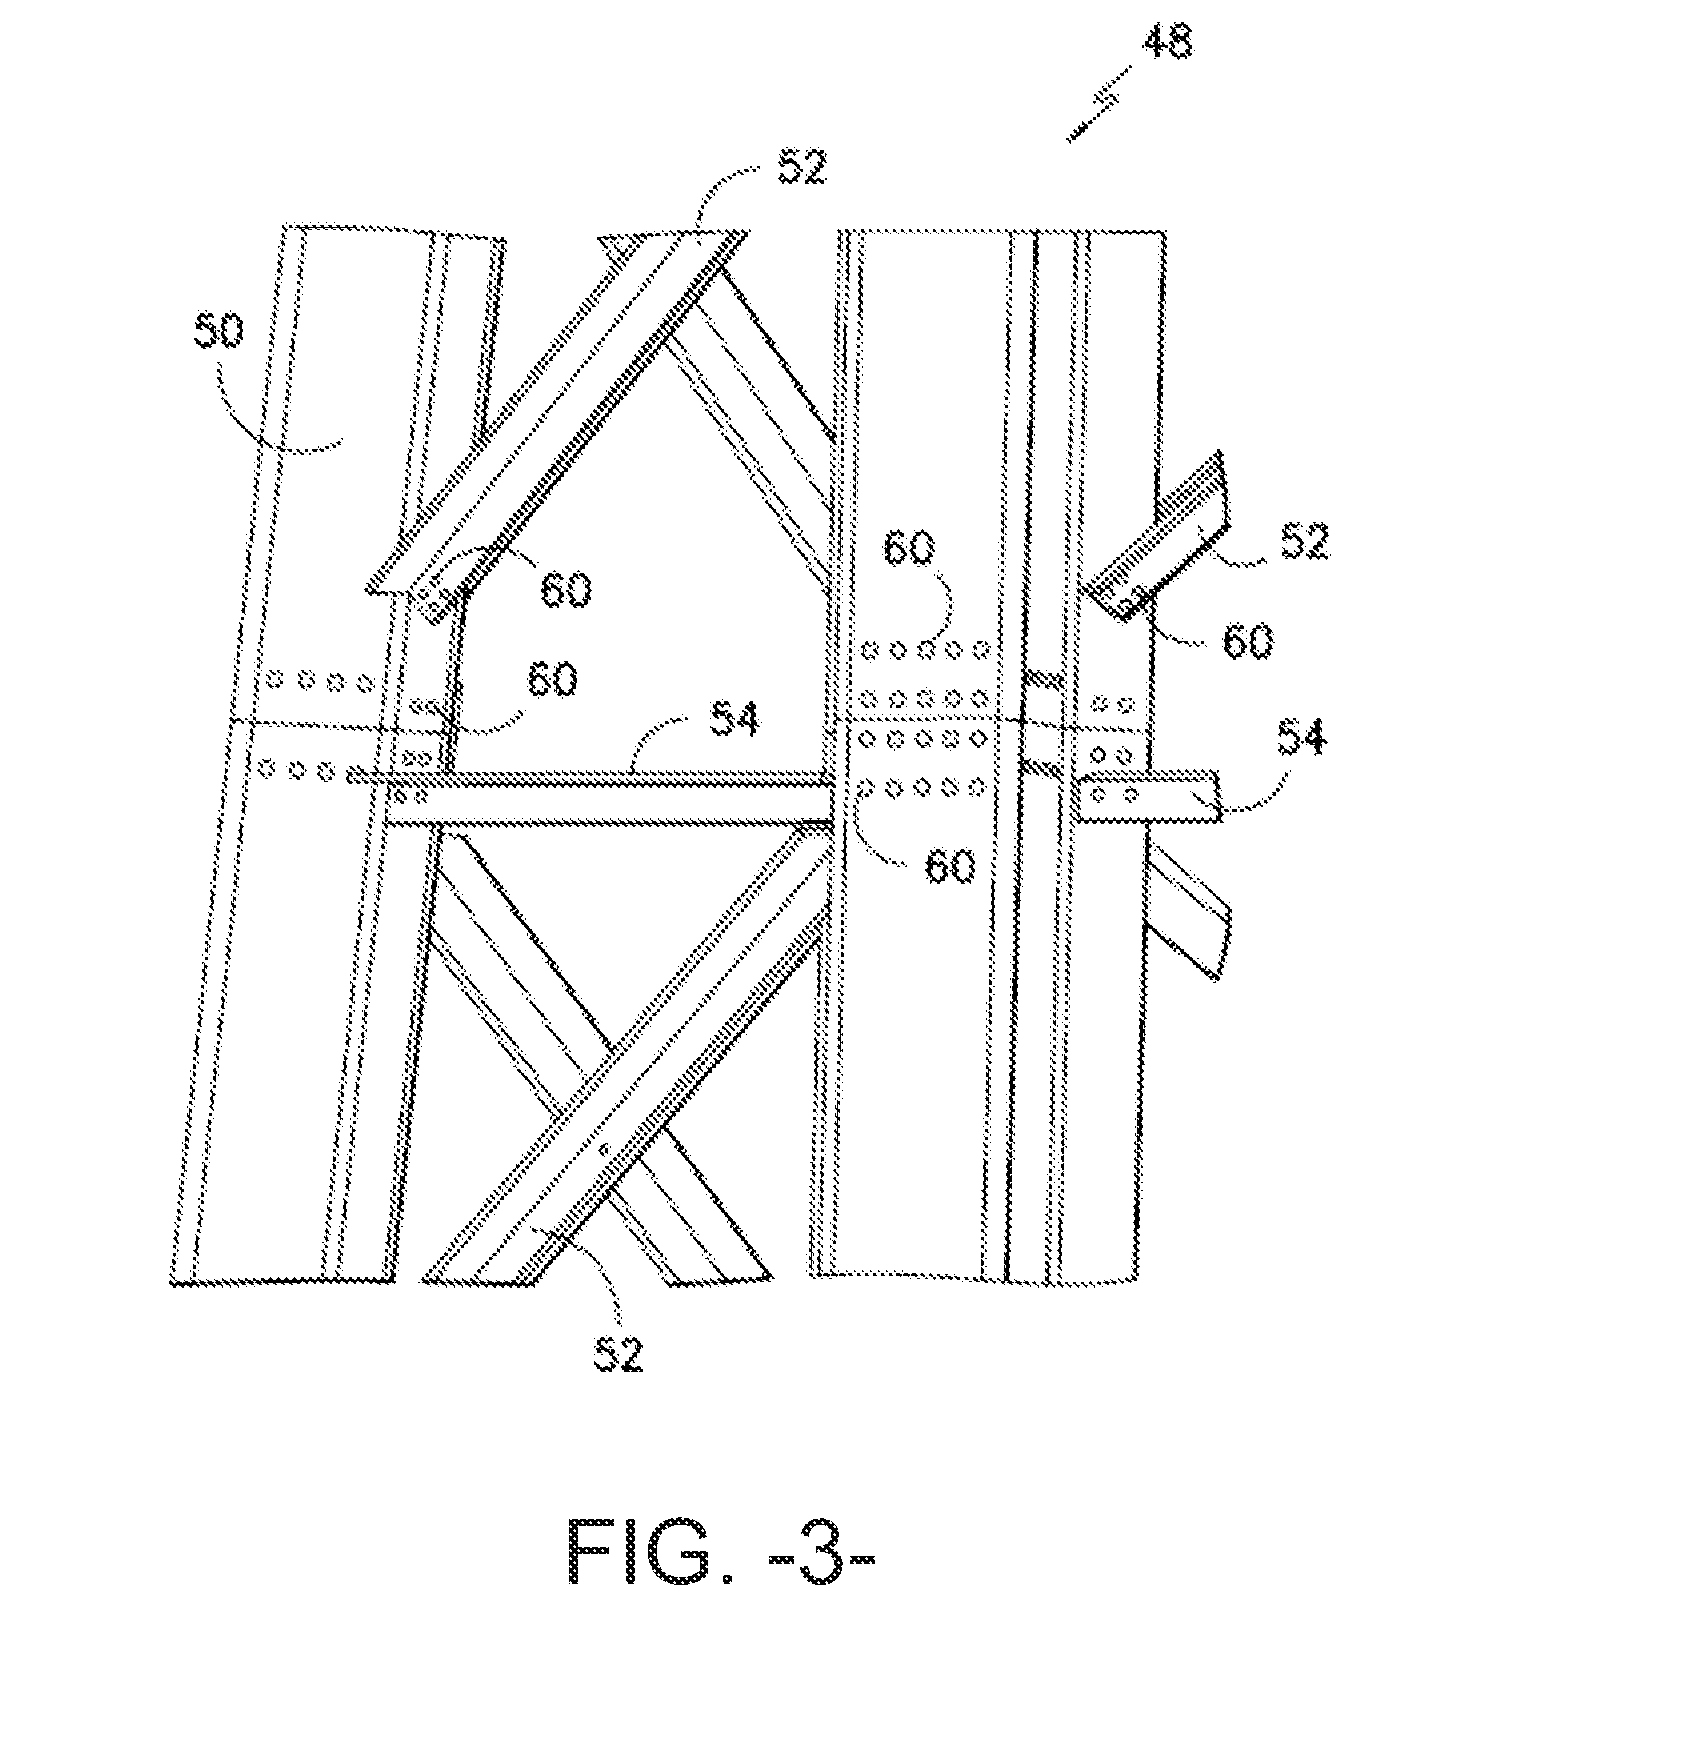 Bolt connection assembly for a wind turbine lattice tower structure